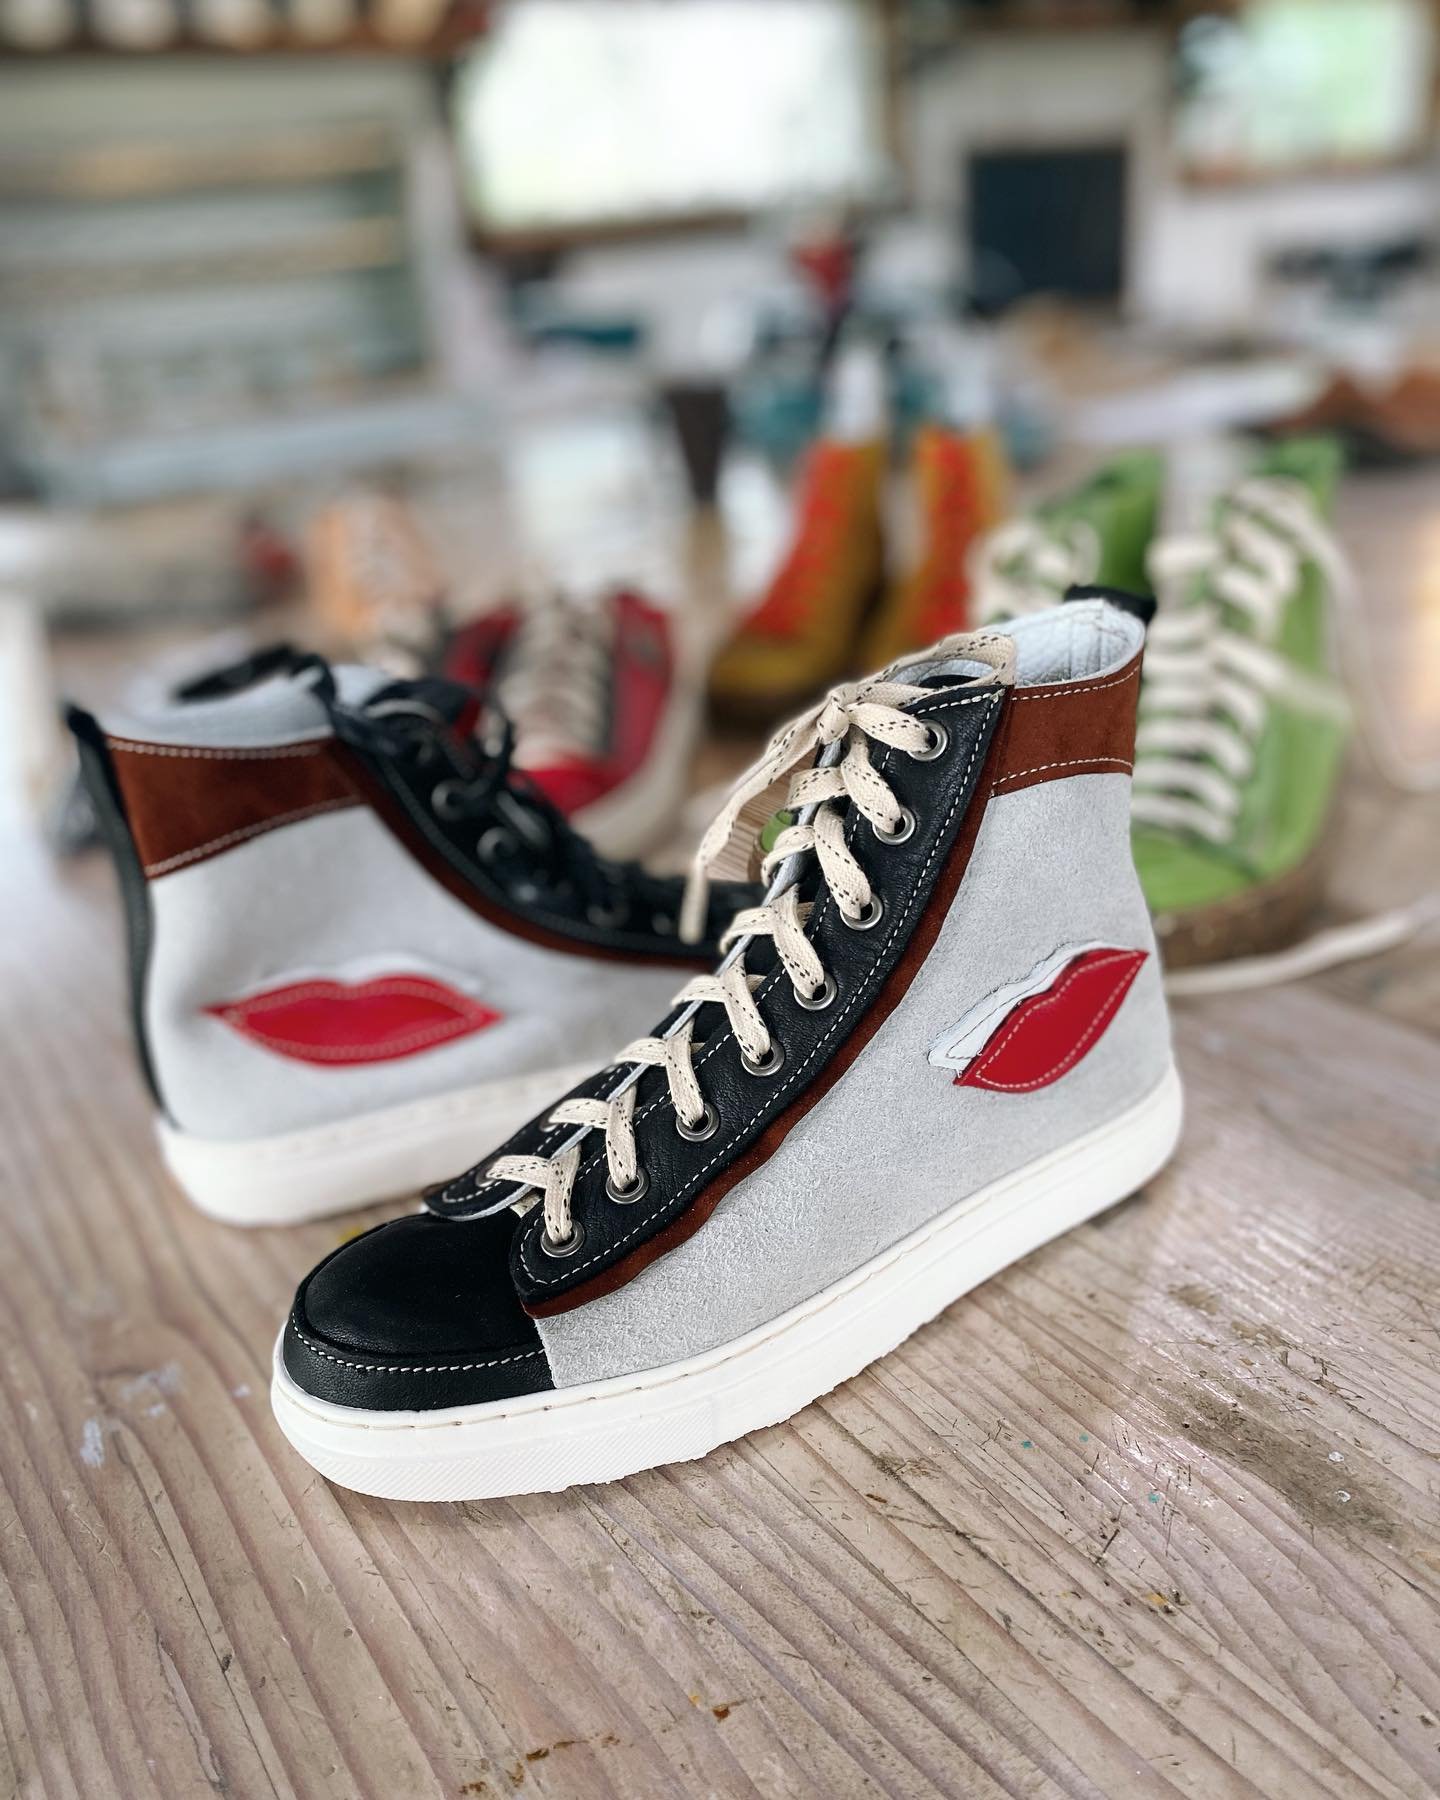 This pair of high tops are sealed with a kiss. What a great design. #coloradoshoeschool, #thingstodoinftcollins , #handmadeshoes, #bellvuecolorado